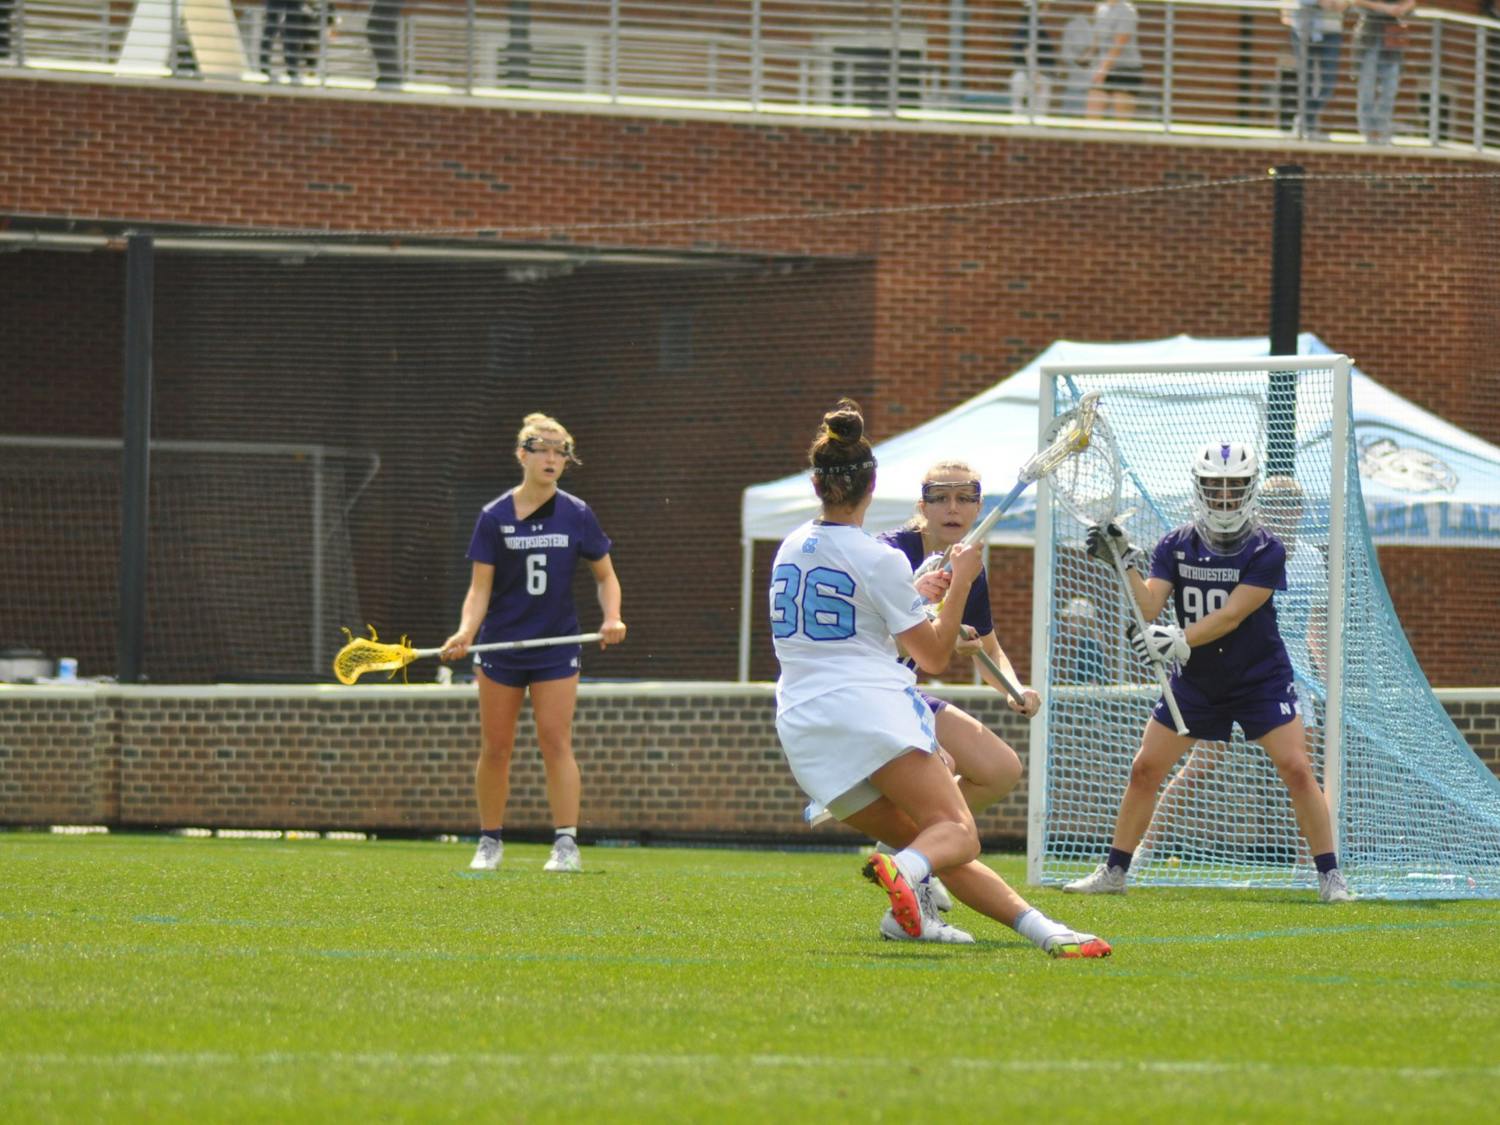 UNC graduate attacker Sam Geiersbach (36) takes a shot on goal during a women's lacrosse game against Northwestern on Sunday, March 6, 2022.  